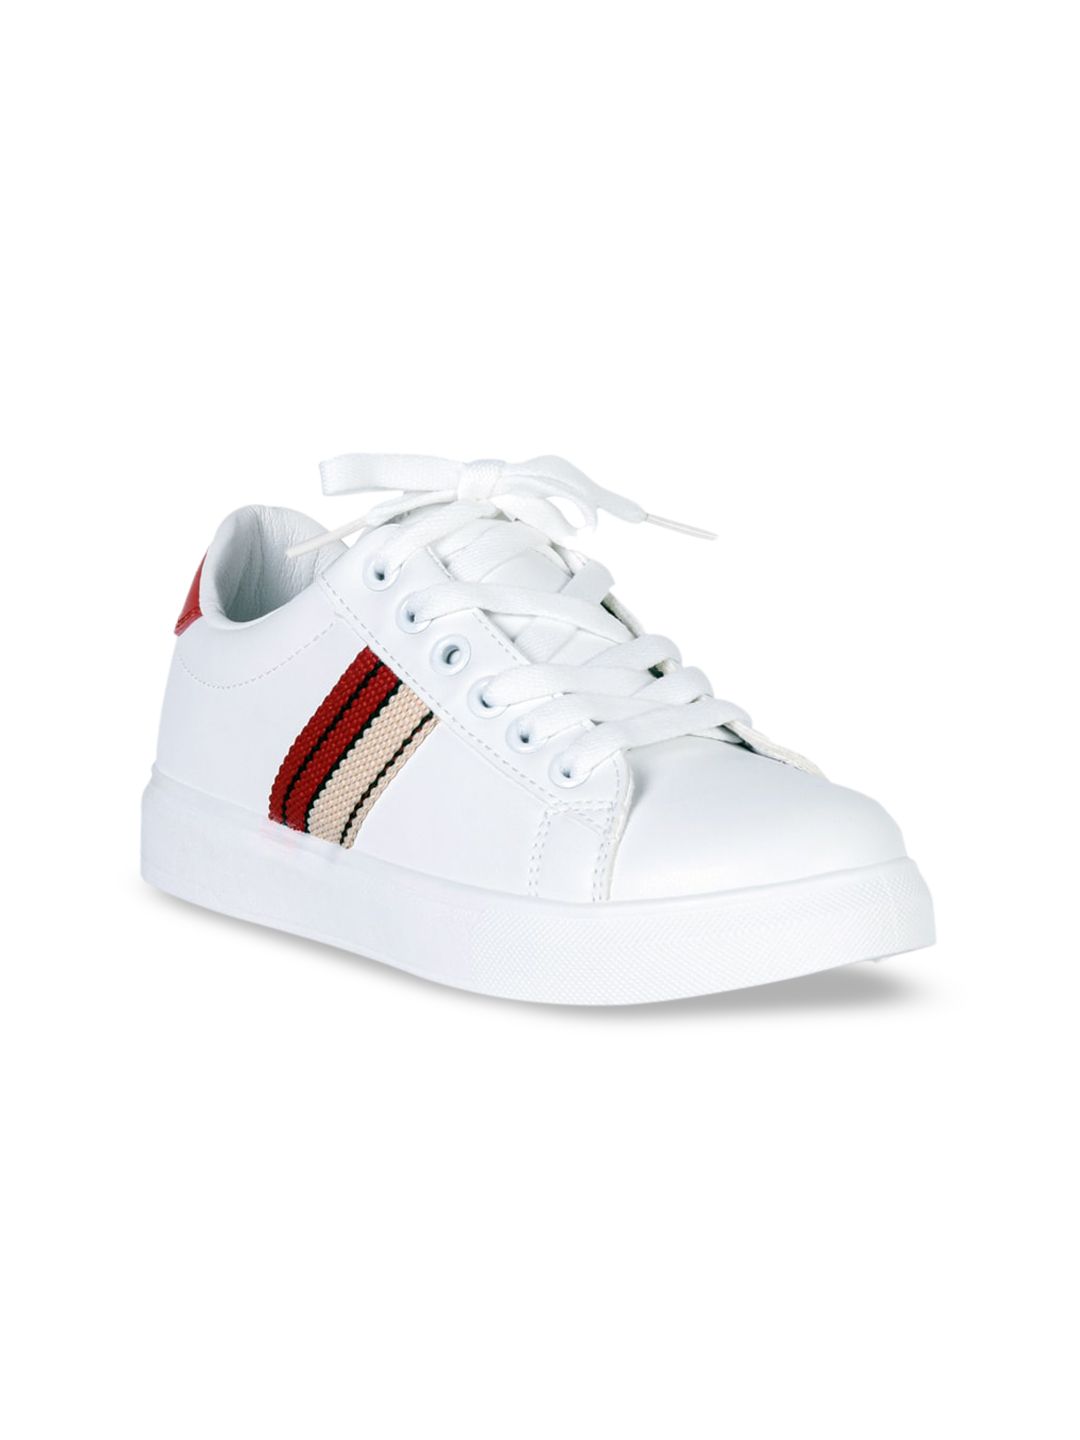 London Rag Women Red Striped Sneakers Price in India